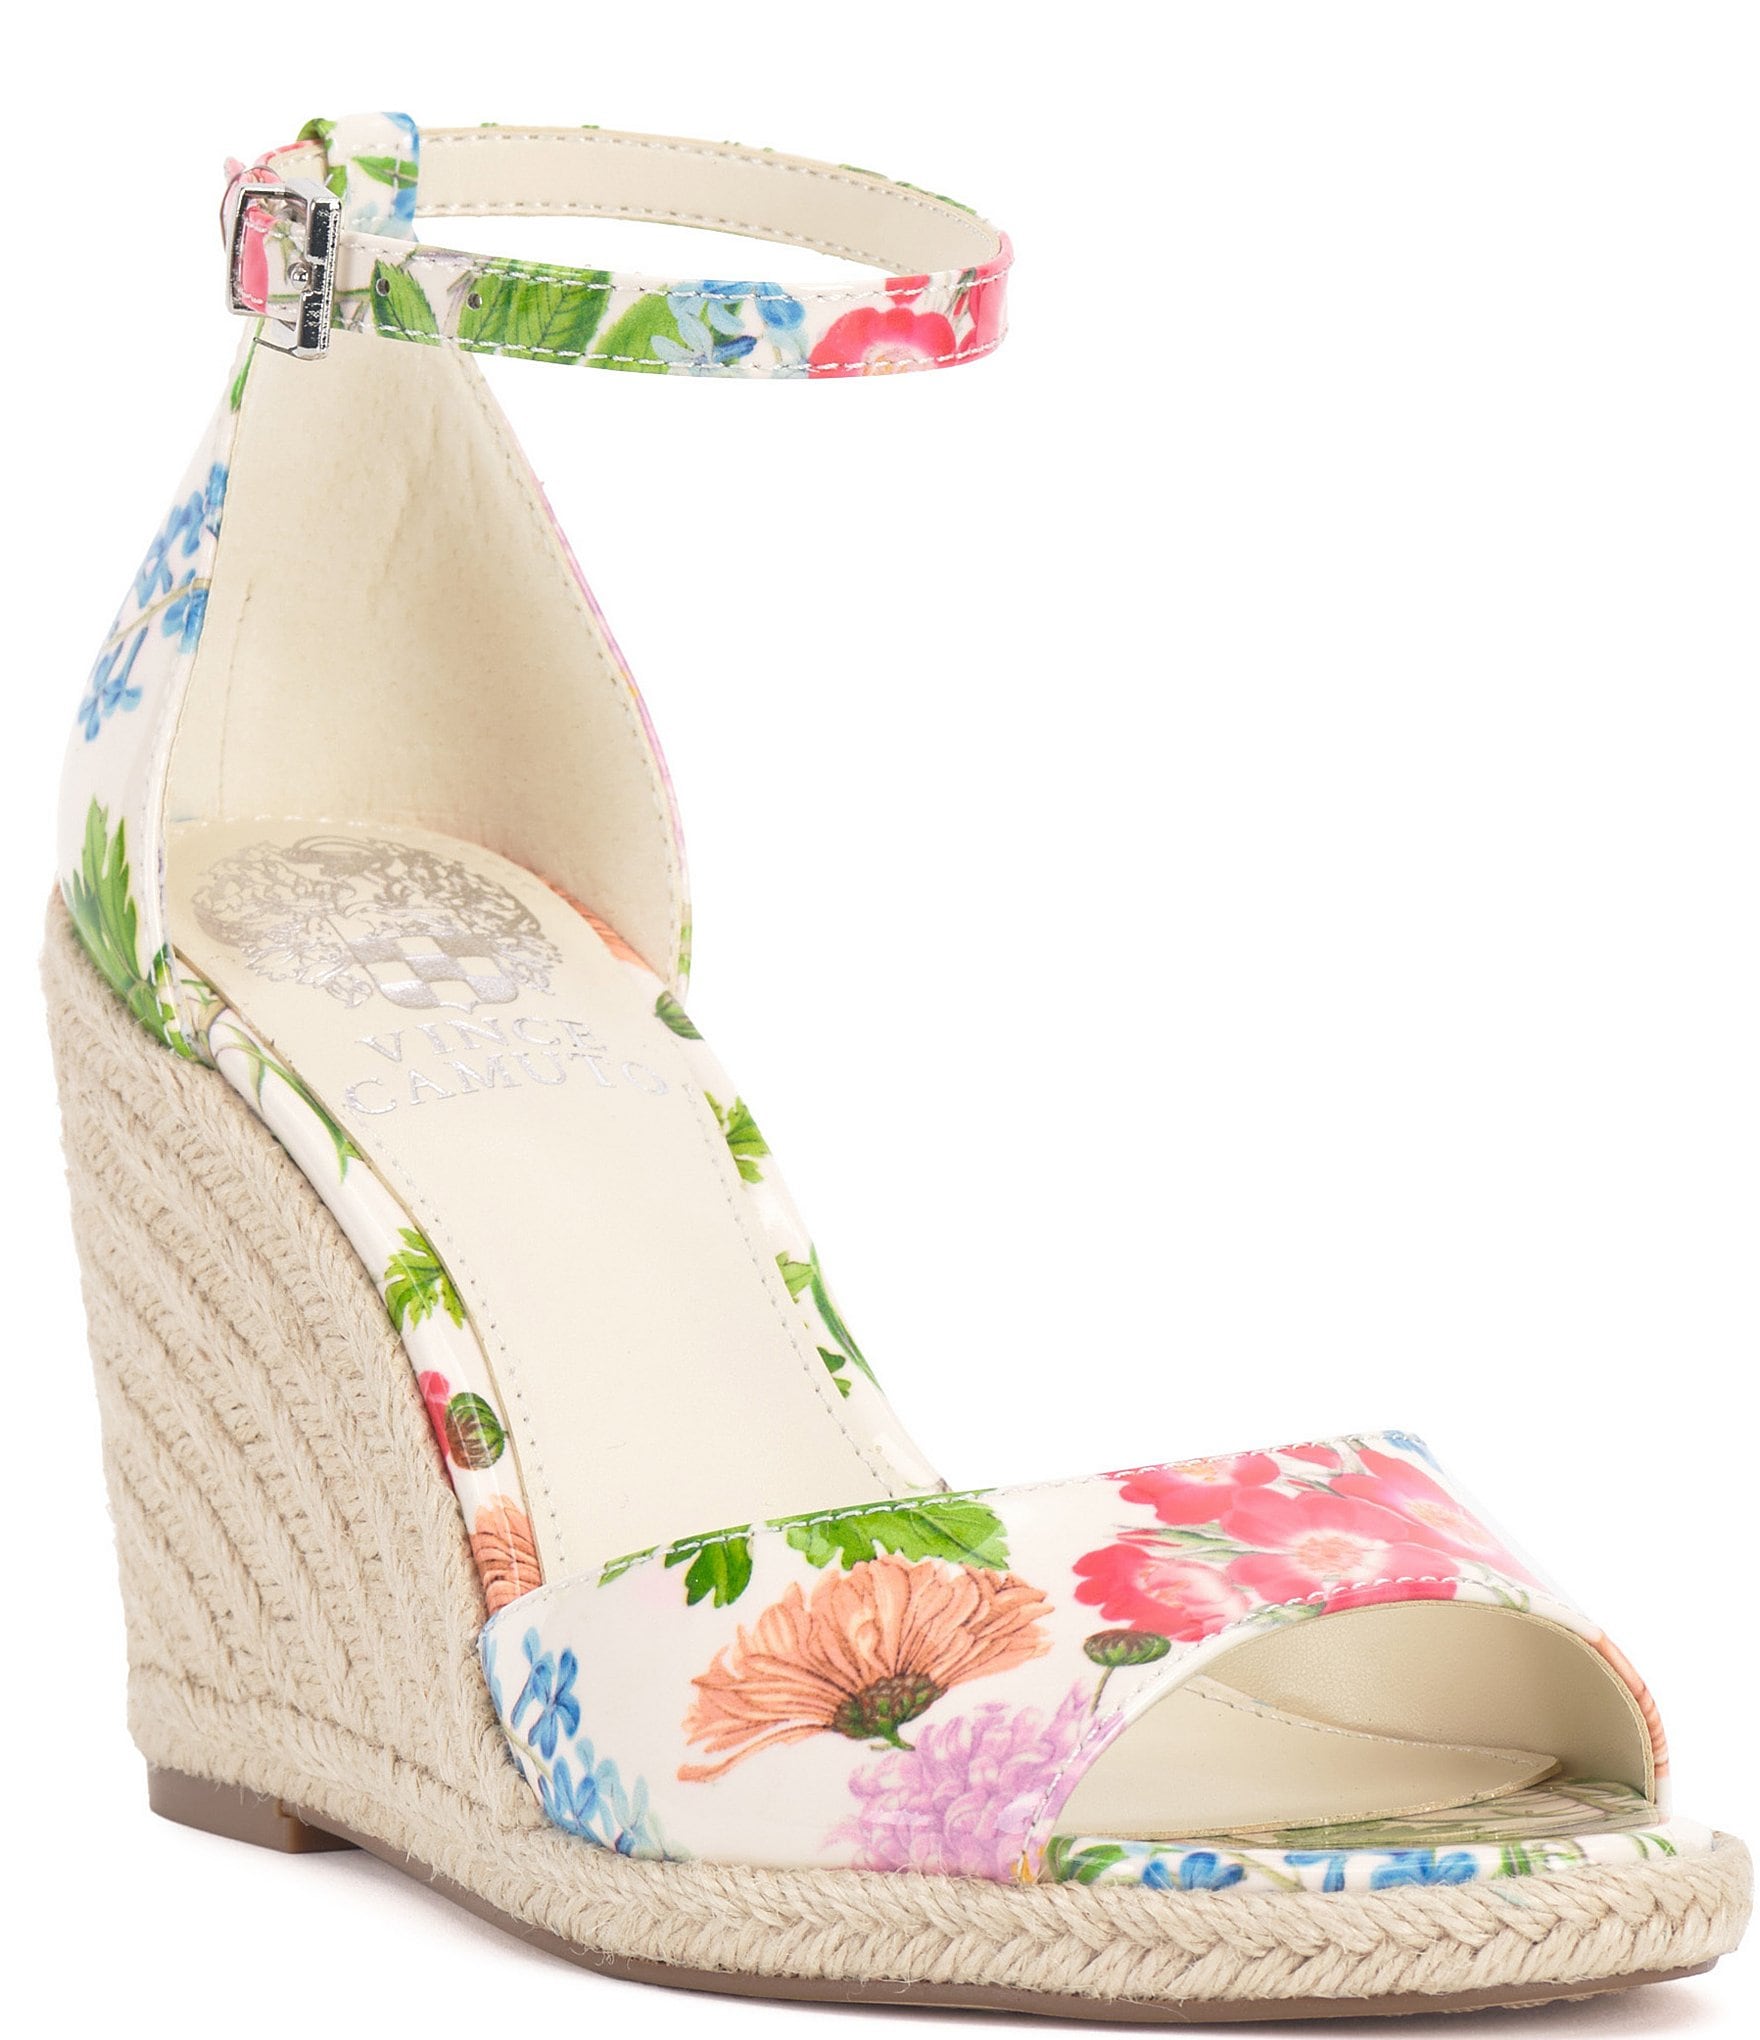 https://dimg.dillards.com/is/image/DillardsZoom/zoom/vince-camuto-felyn-espadrille-floral-leather-wedges/00000000_zi_c62167aa-2b06-466b-a179-78d191a2588a.jpg